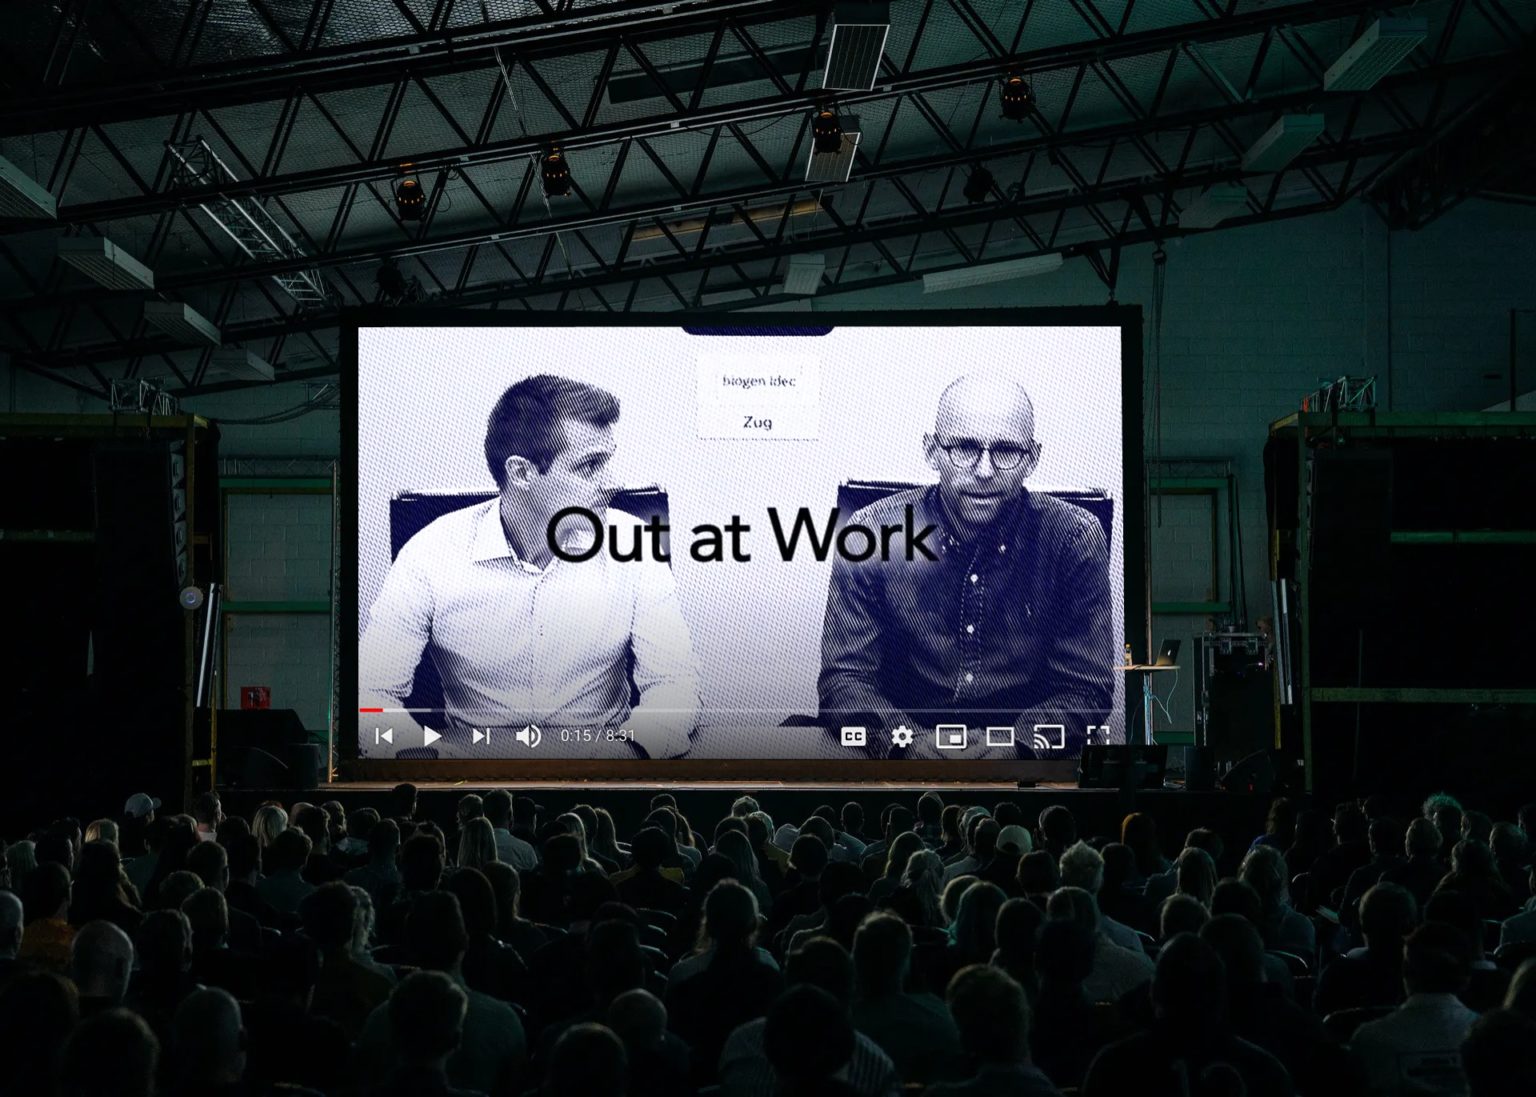 Screen capture of a corporate video called “Out at Work” about Biogen’s LGBTQ community and allies.